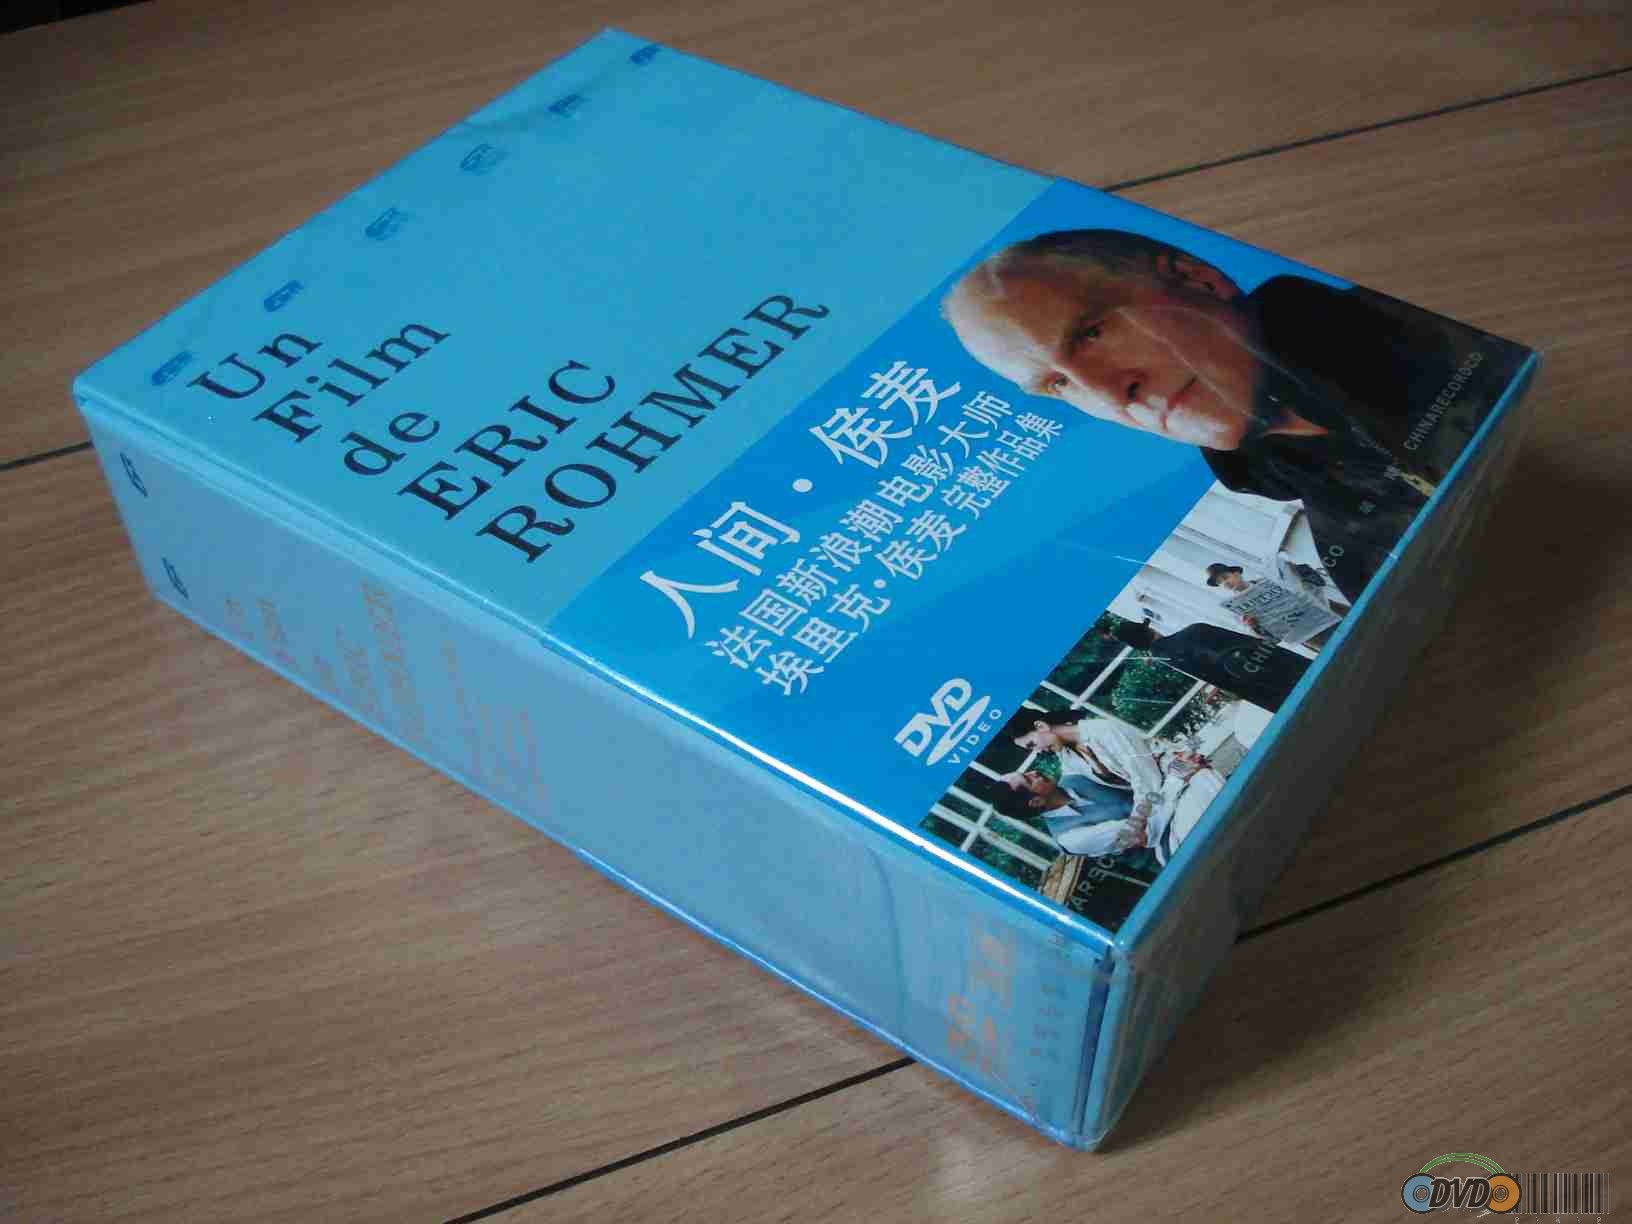 Eric Rohmer Collection 25DVDs boxset - Drama - Buy discount dvd